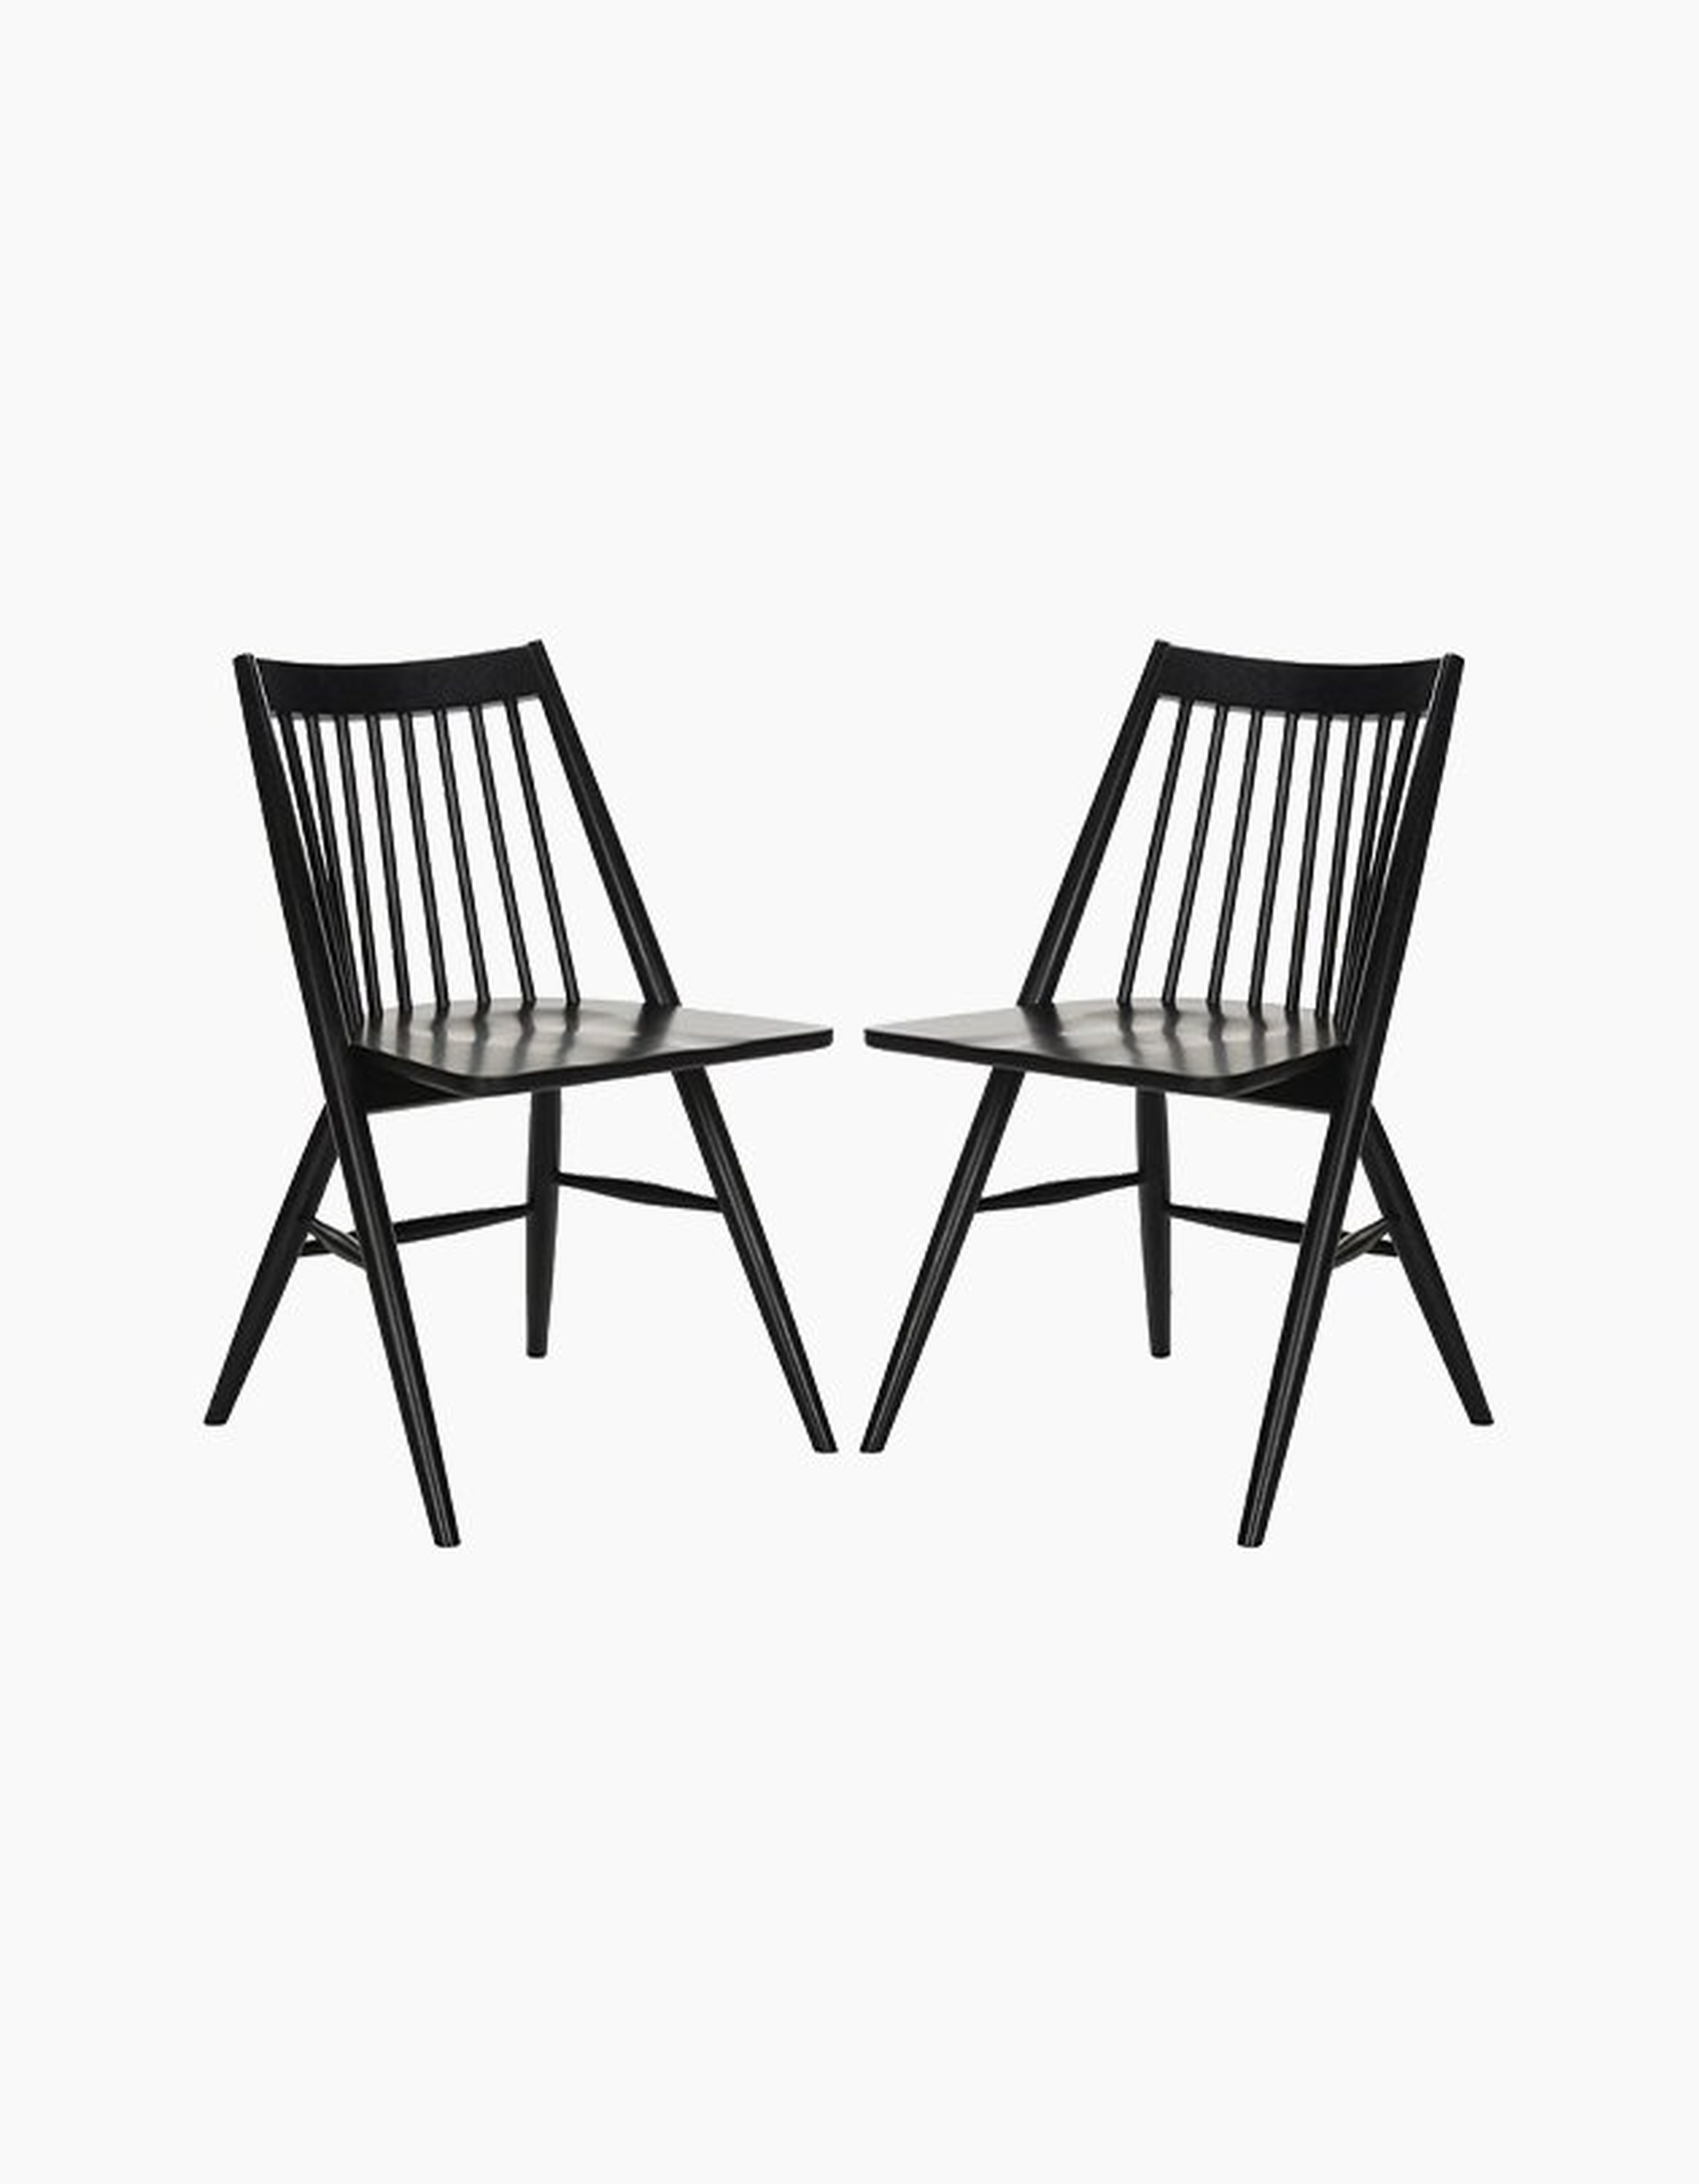 Wren 19"H Spindle Dining Chair - Set of Two - Safavieh